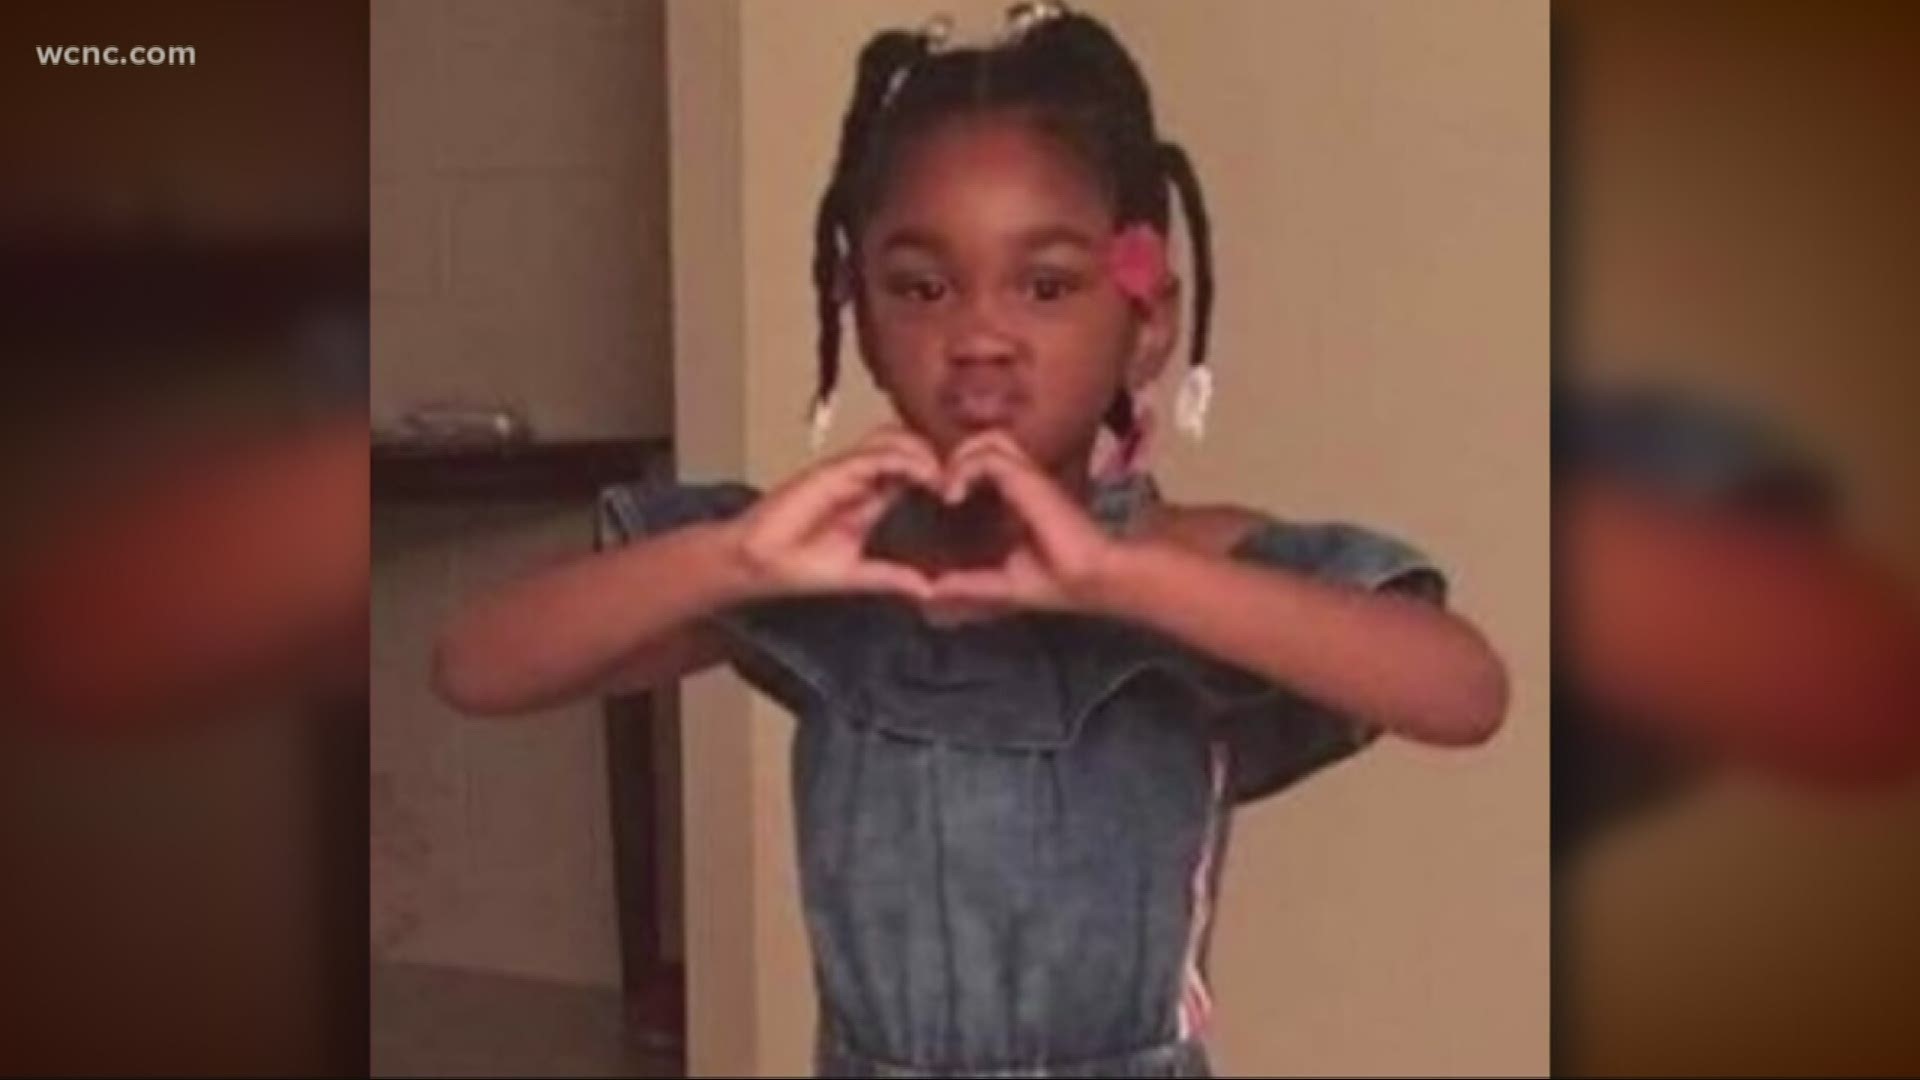 Search crews in South Carolina found the remains of 5-year-old Neveah Adams in a landfill Tuesday. Police say she was killed with her mother over the summer.